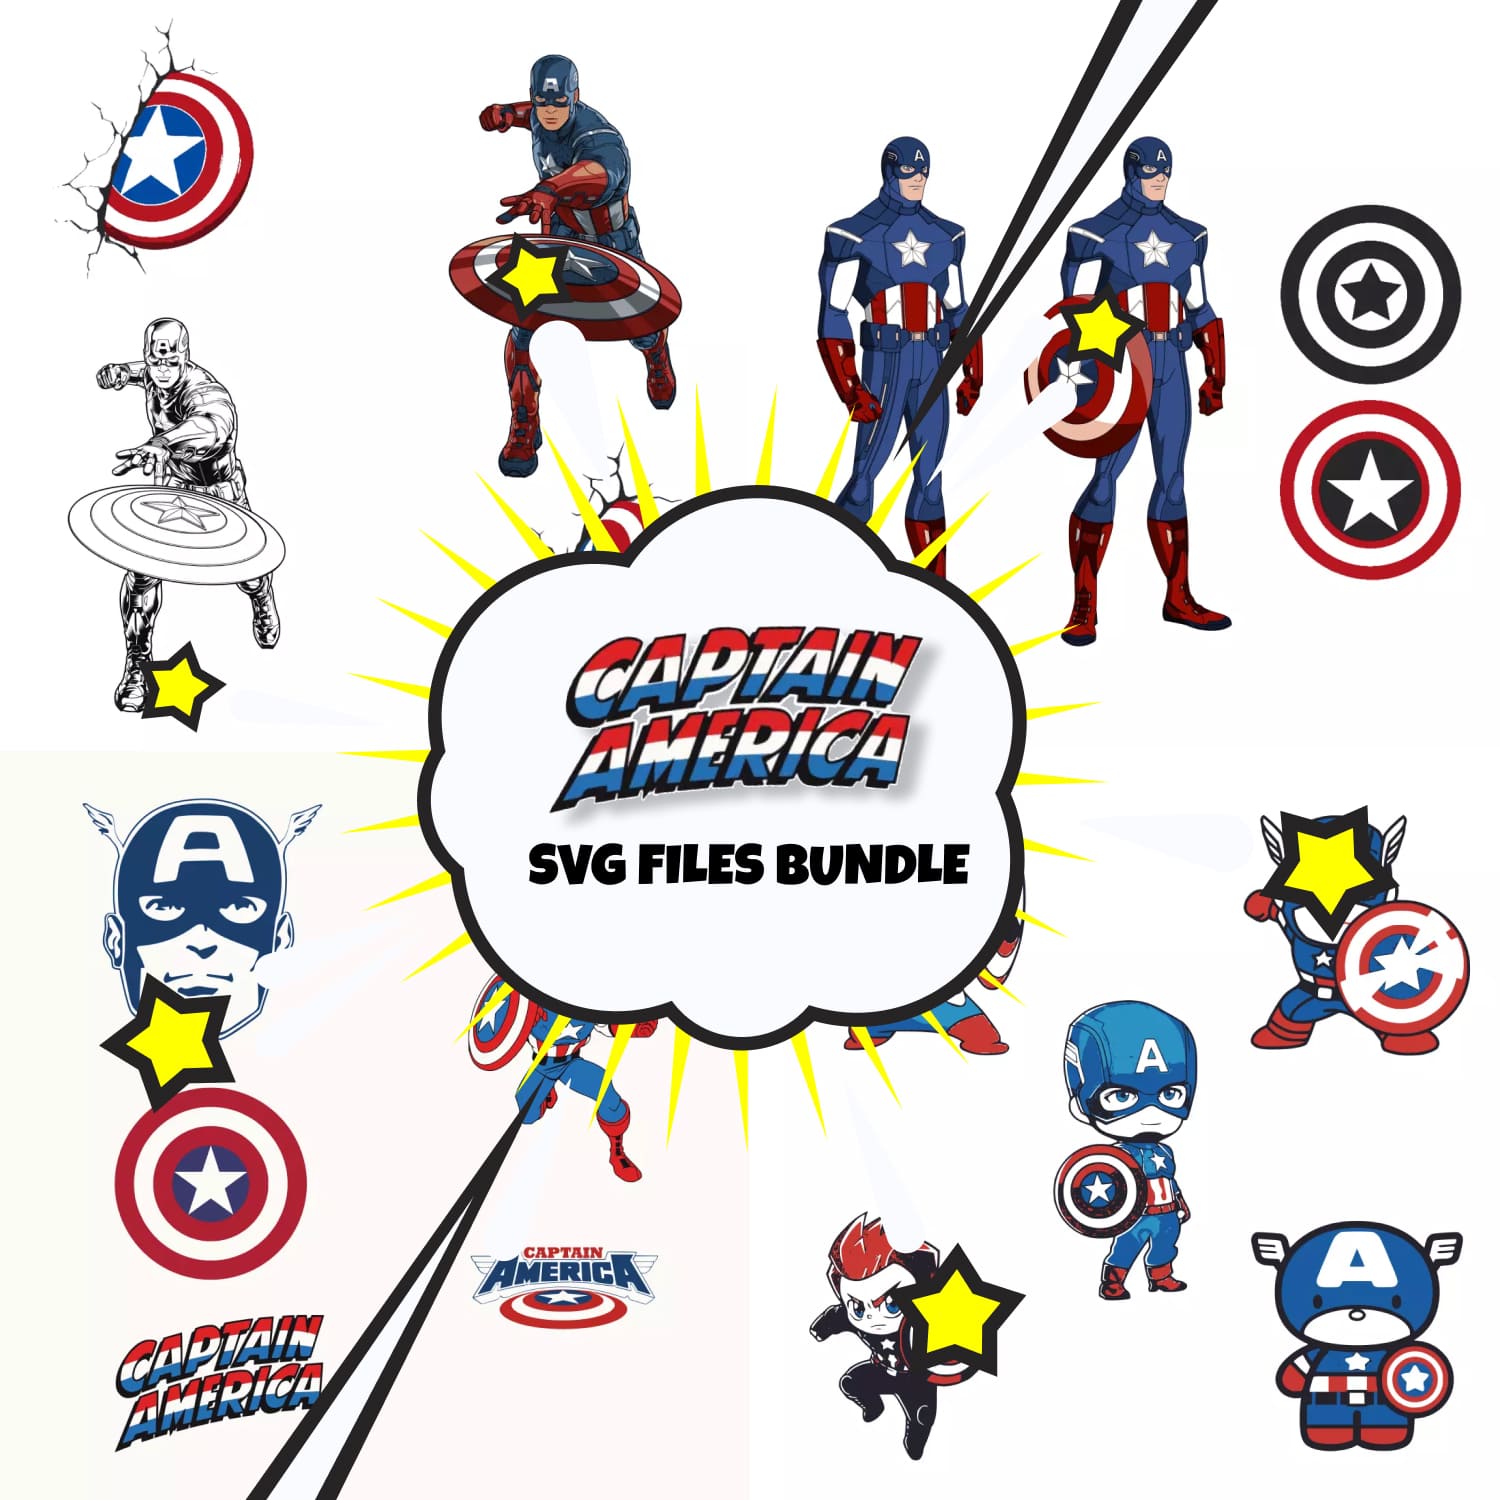 Captain america SVG files bundle, first picture 1500x1500.